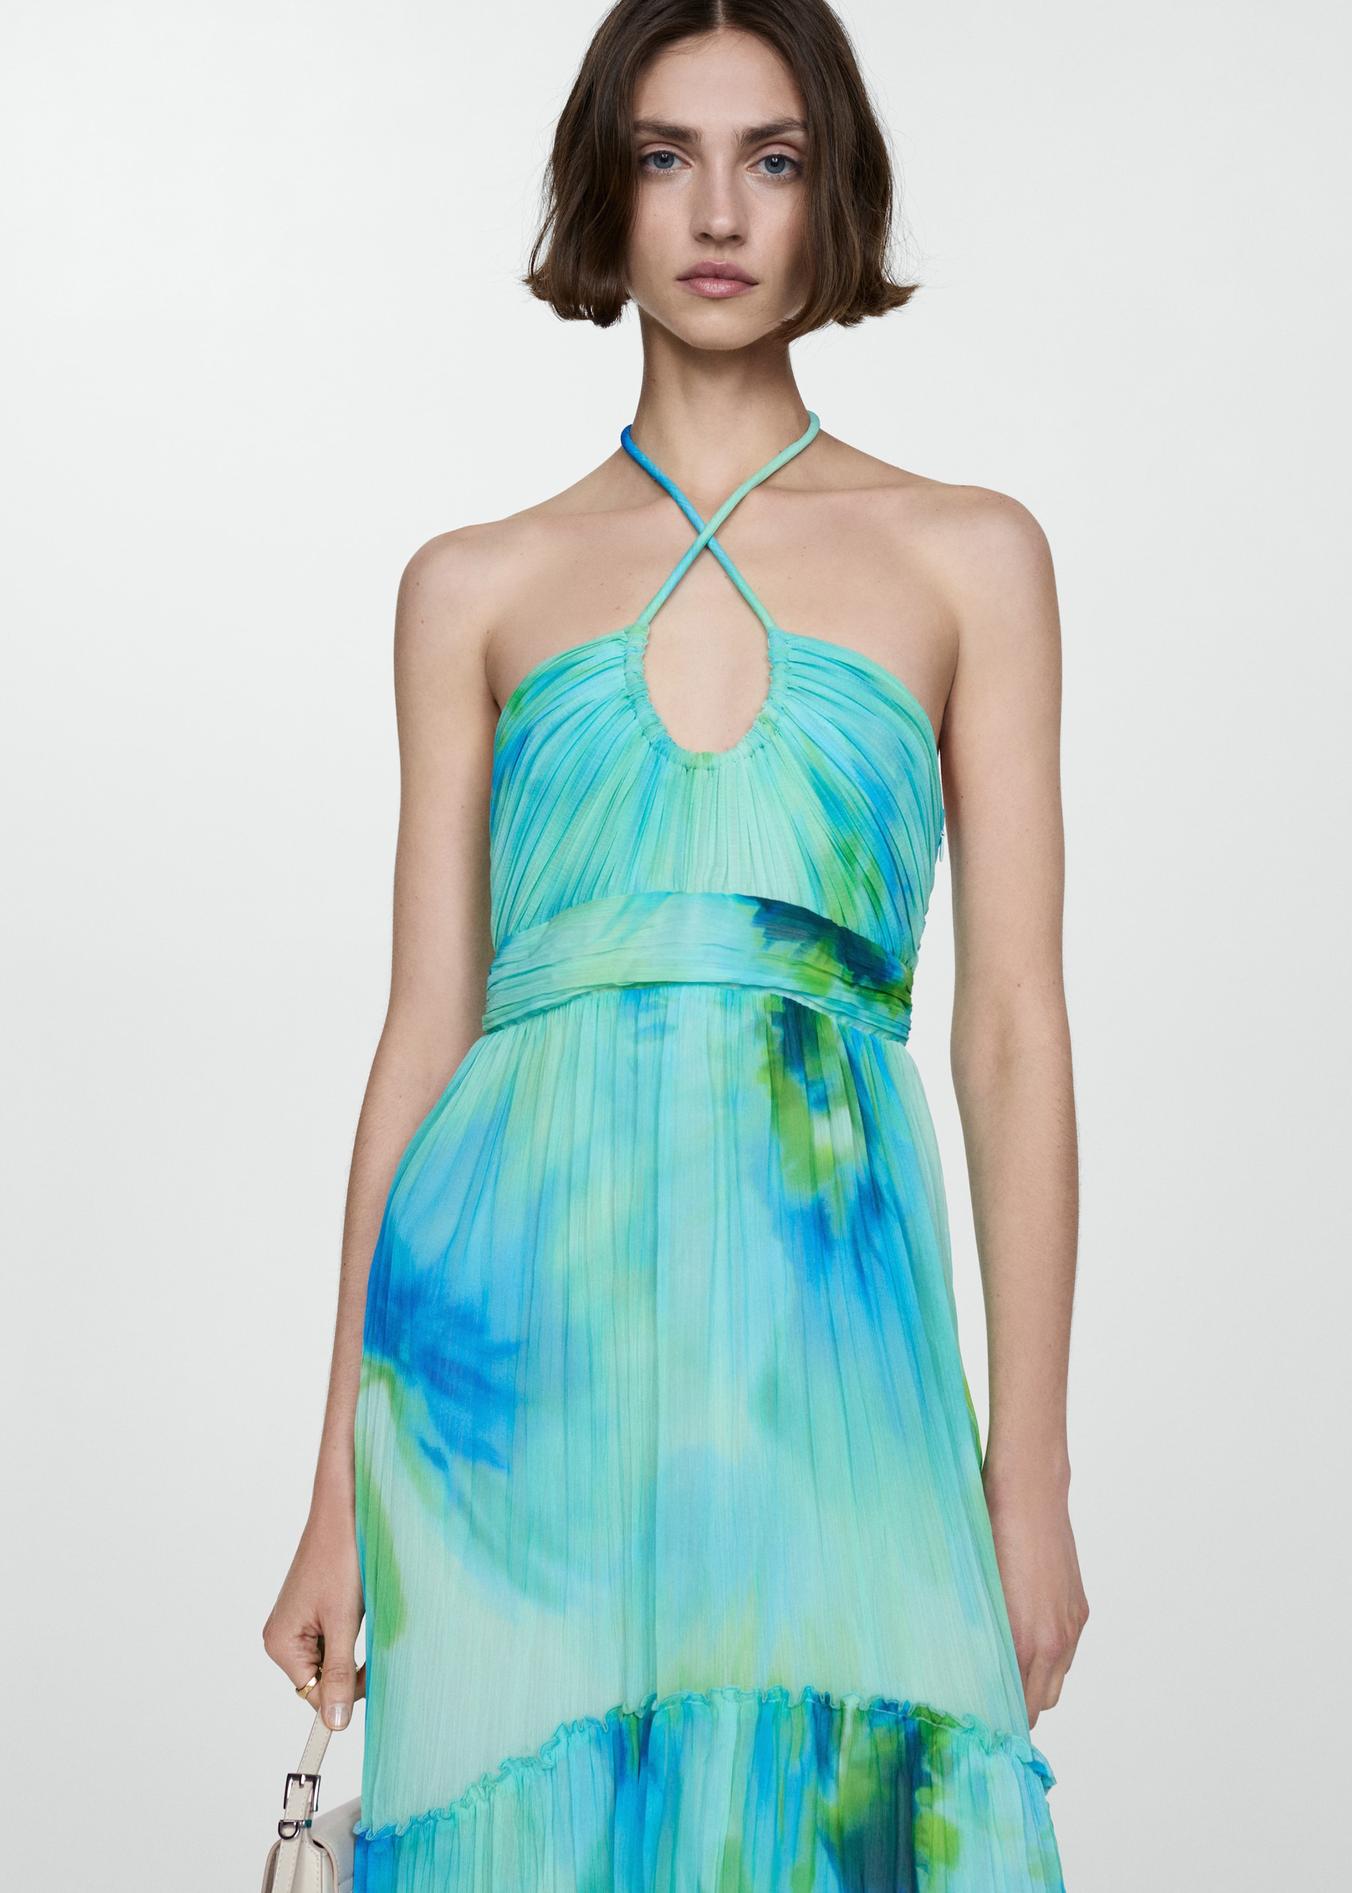 Printed halter gown offers at S$ 99.9 in Mango